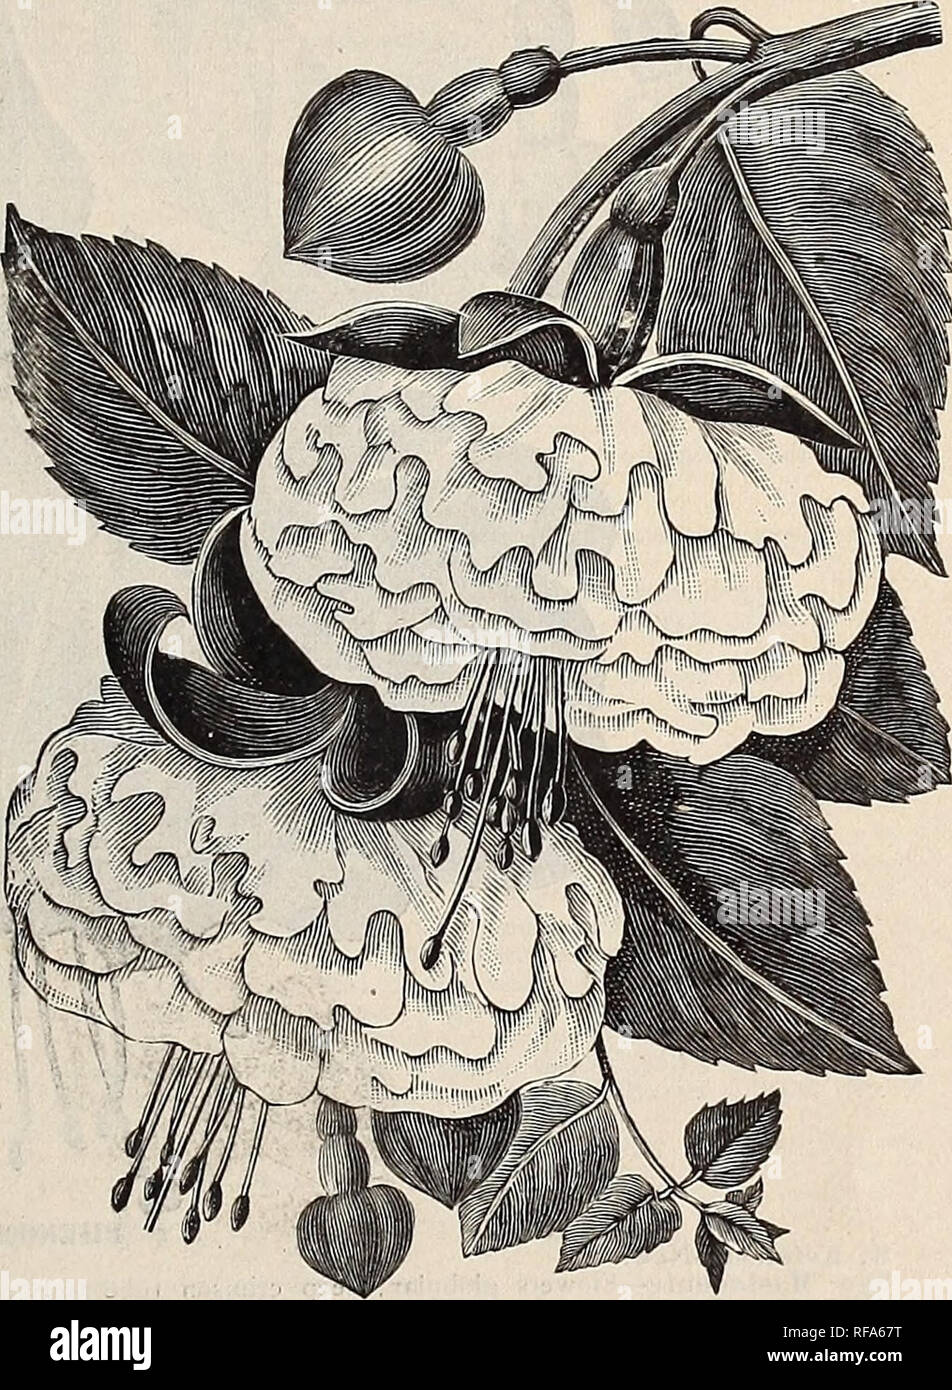 . [Catalogue of] Cottage Rose Garden, 1889. Nursery stock Ohio Catalogs; Flowers Catalogs. UKPLE PRINCE. STORM KING. Dranie—Flowers double with large petals of a ^'ery beautiful blue, sepals finely reflexed, of a lively red. Due of Albany—Corolla single, purplish red, tube and petals bright red. England's Glory—Pink corolla with carmine shade ; a beautiful sort. Elm City—Sepals rich crimson, corolla purple, globular, double. Earl of Beaconsfield—The blooms are three inches in length, and of great substance, the tube and sepals are of a light rosy car- mine, corolla deep carmine. Esmeralda—A gr Stock Photo